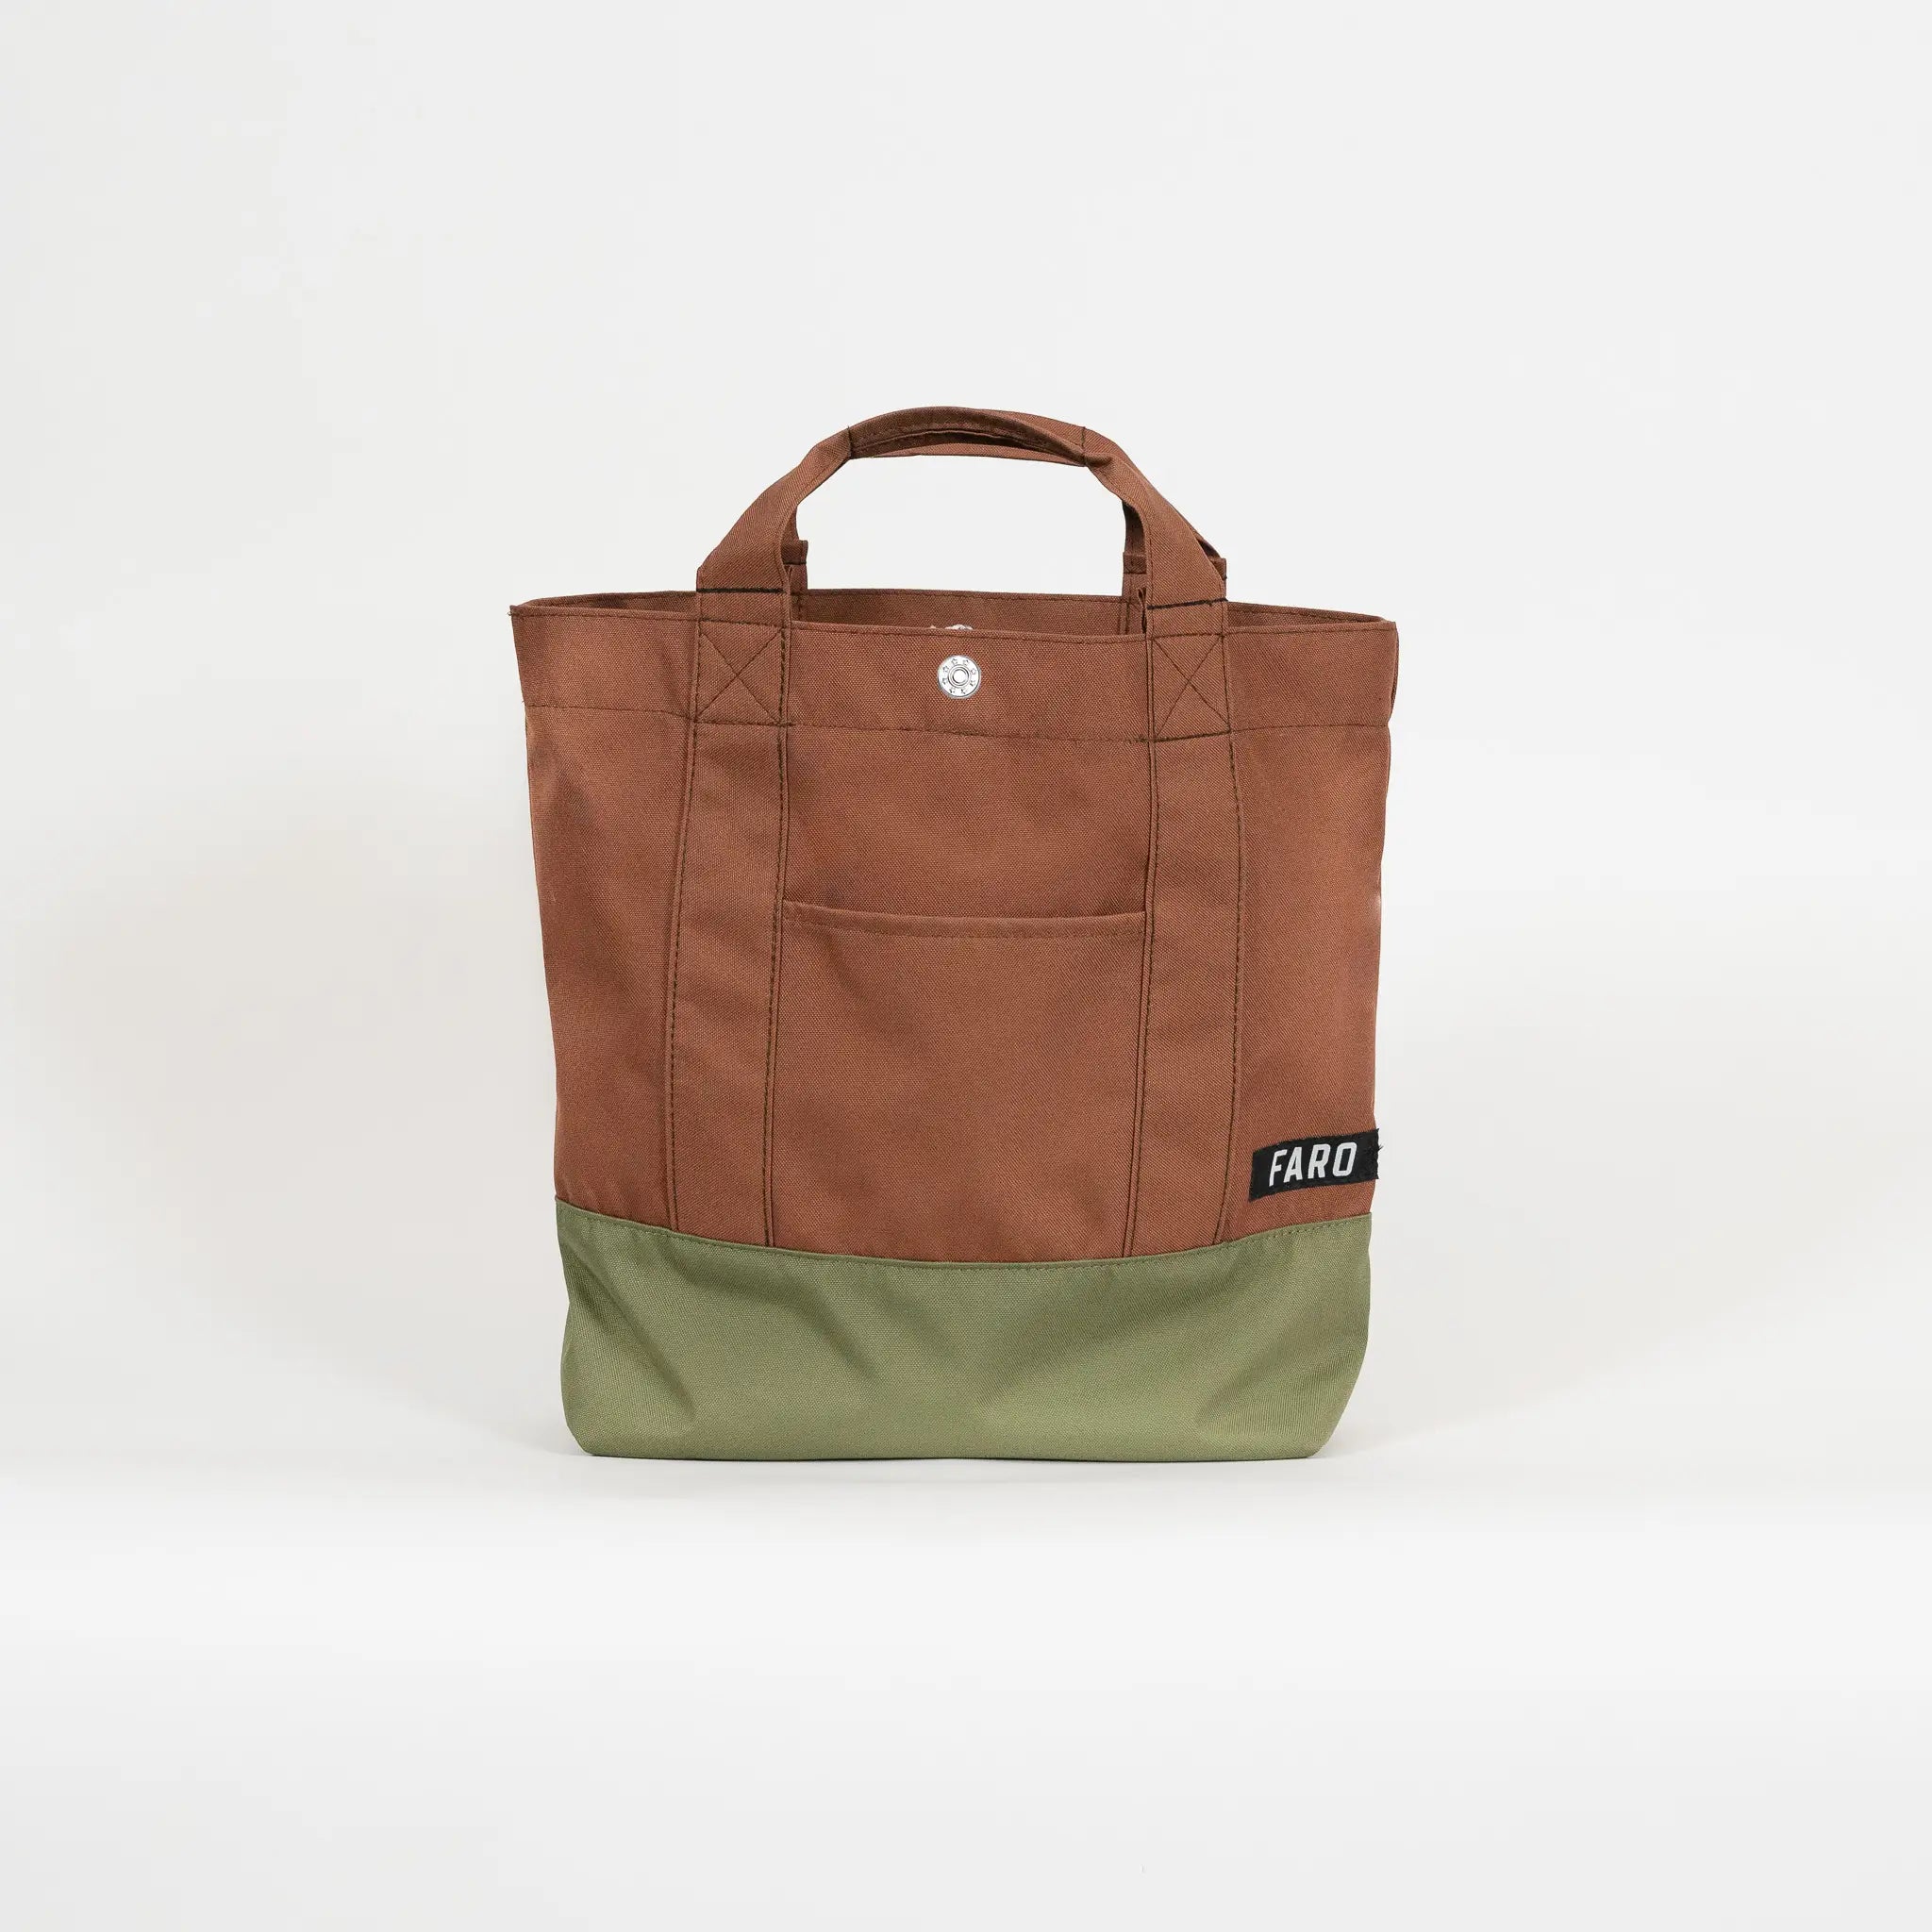 FARO water proof tote bag with a unique bungee closure